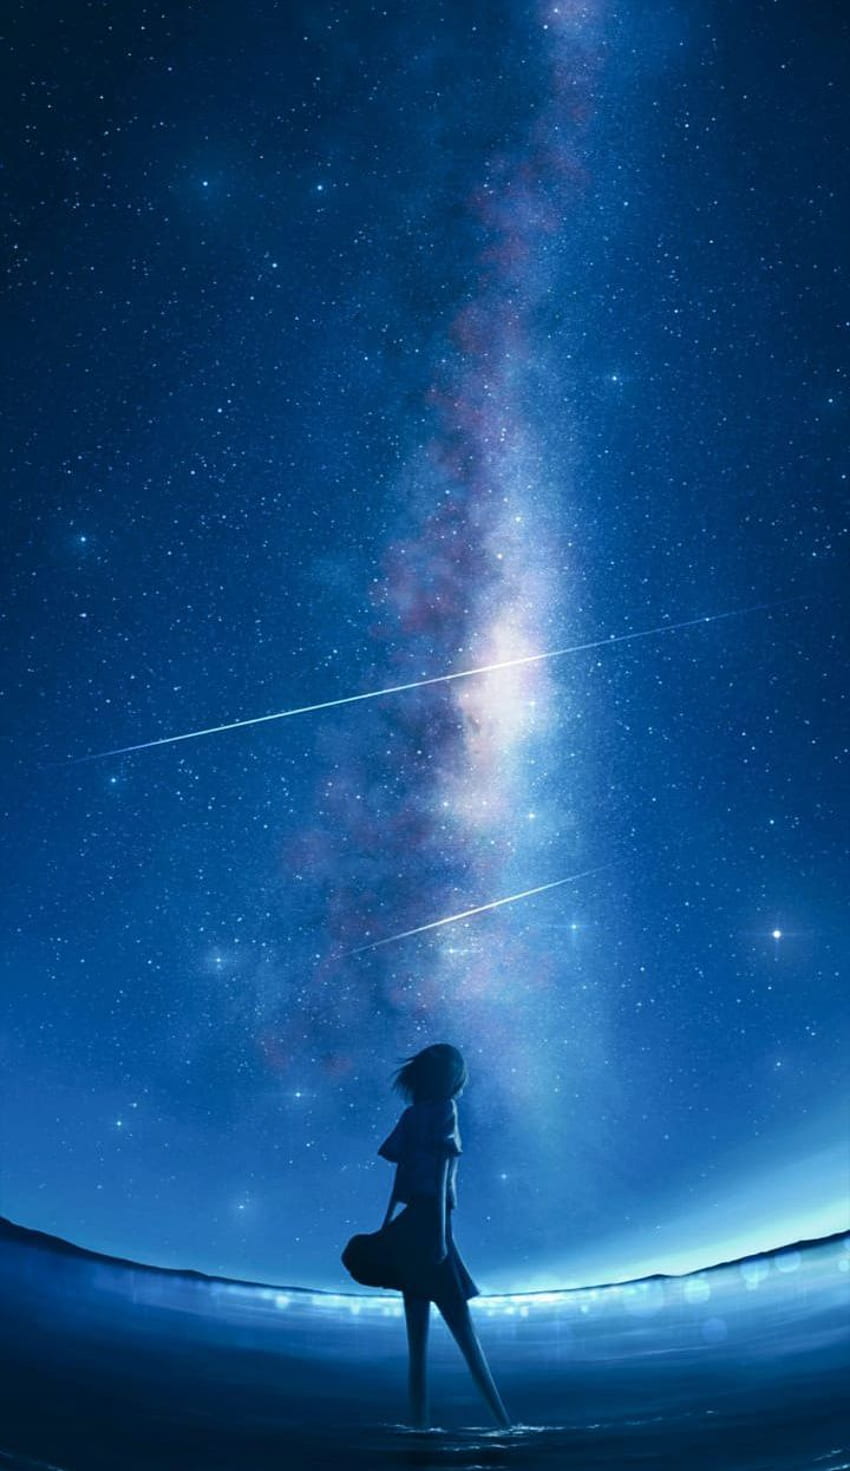 Night Sky Anime Wallpaper Stock Photo, Picture and Royalty Free Image.  Image 206808517.